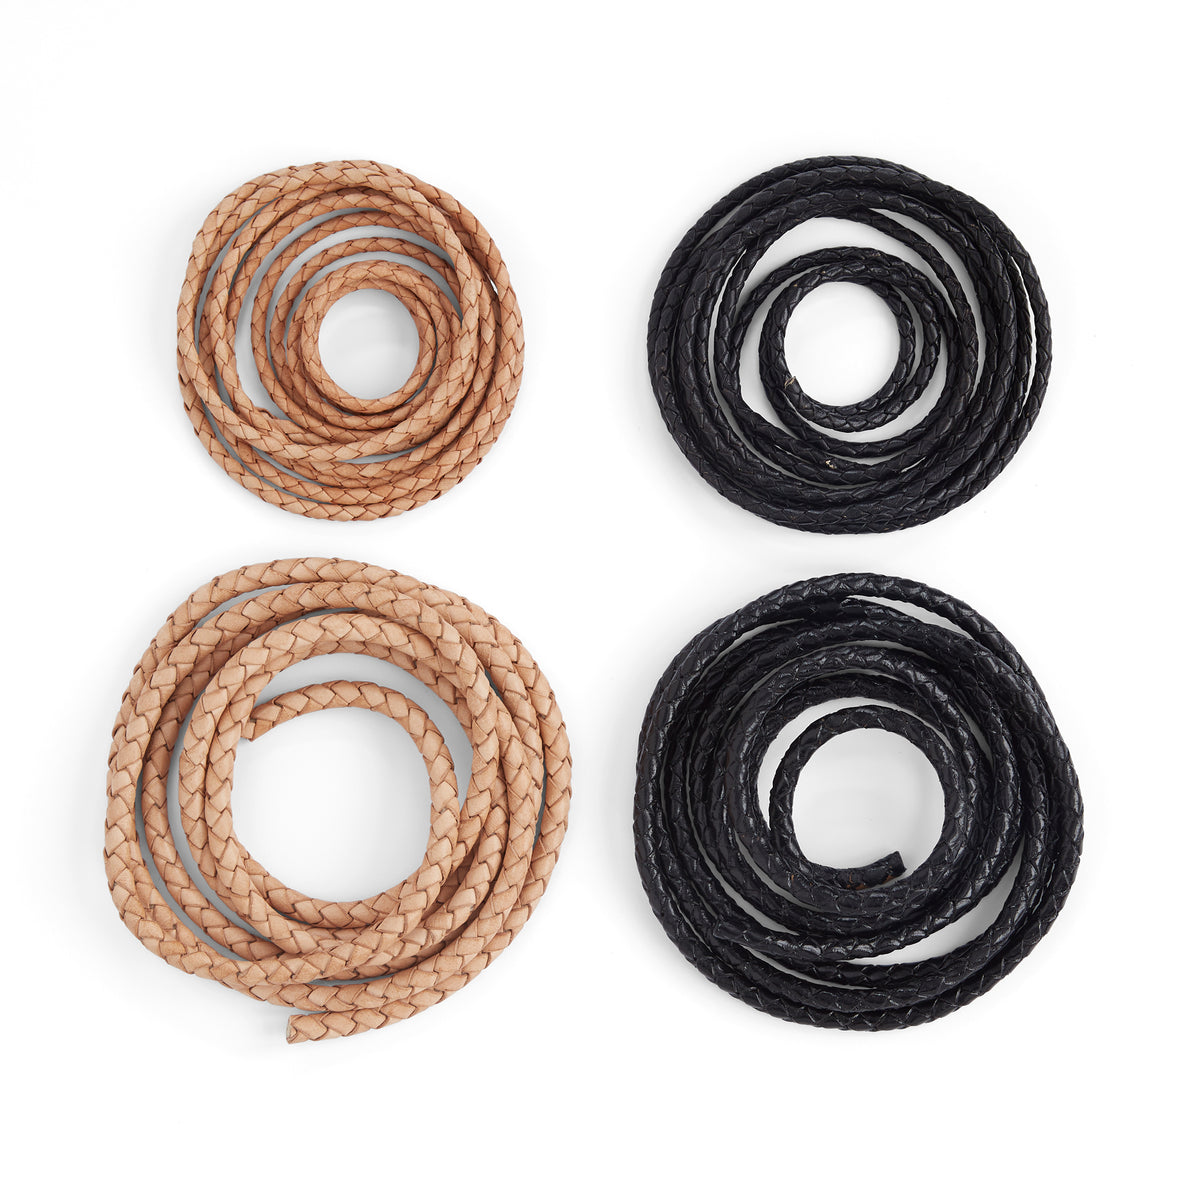  1 Yard Real Braided Leather Cord-Flat Braided Leather